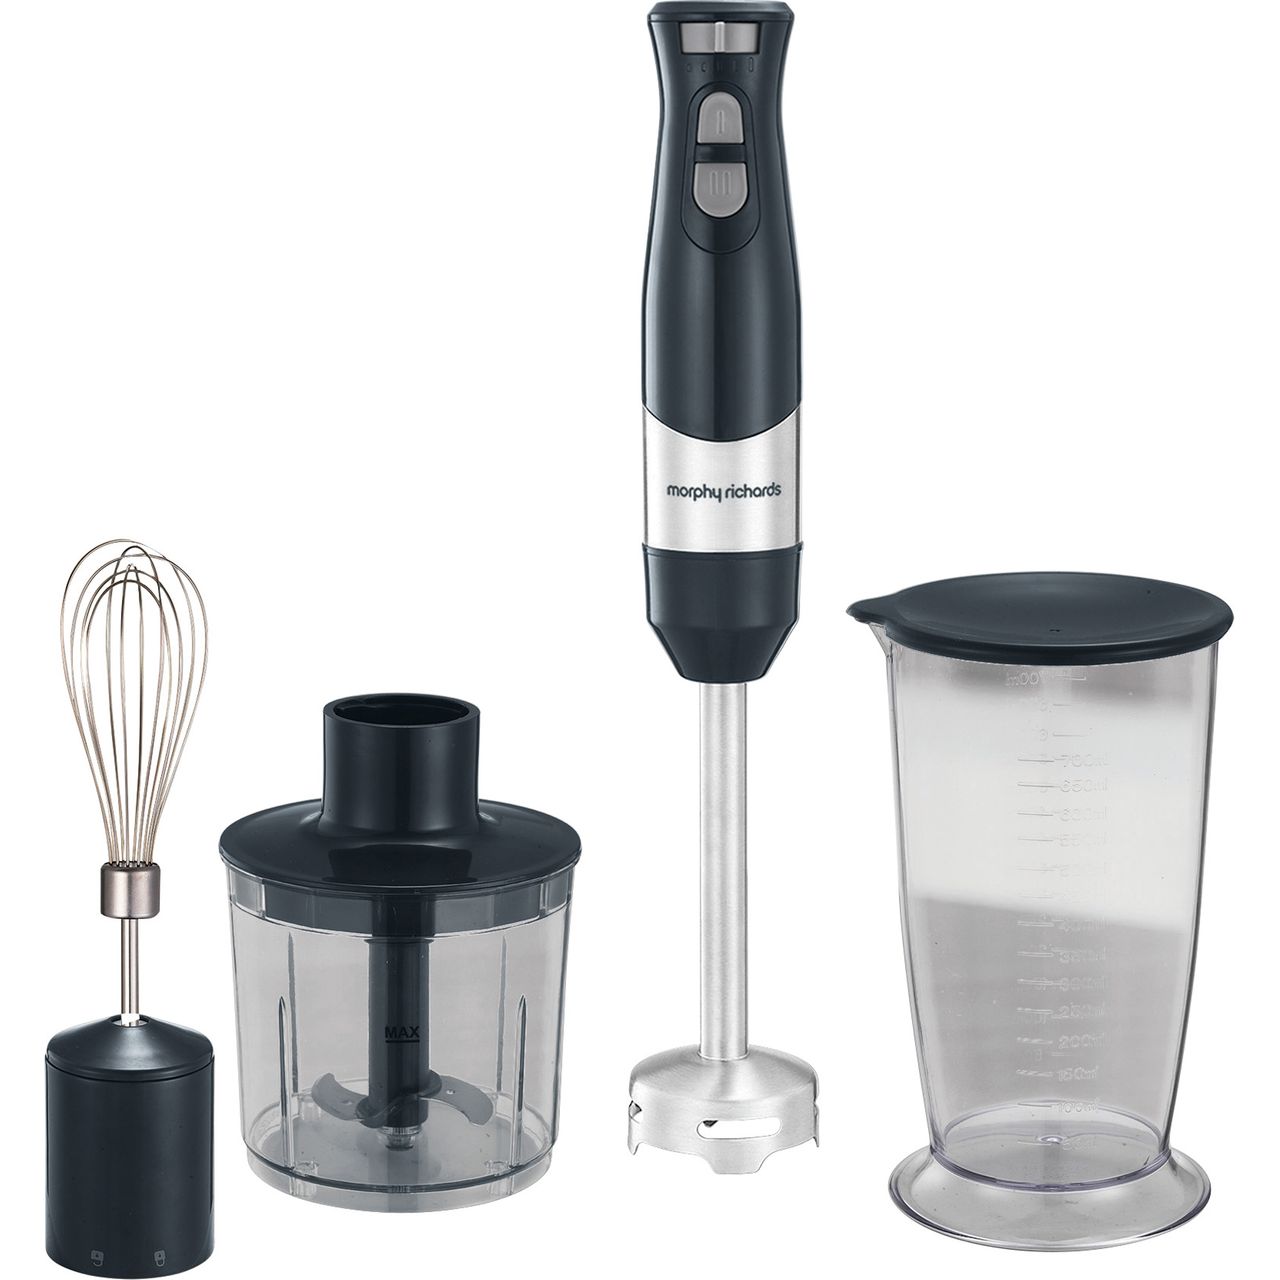 Morphy Richards Total Control 402061 Hand Blender with 4 Accessories Review